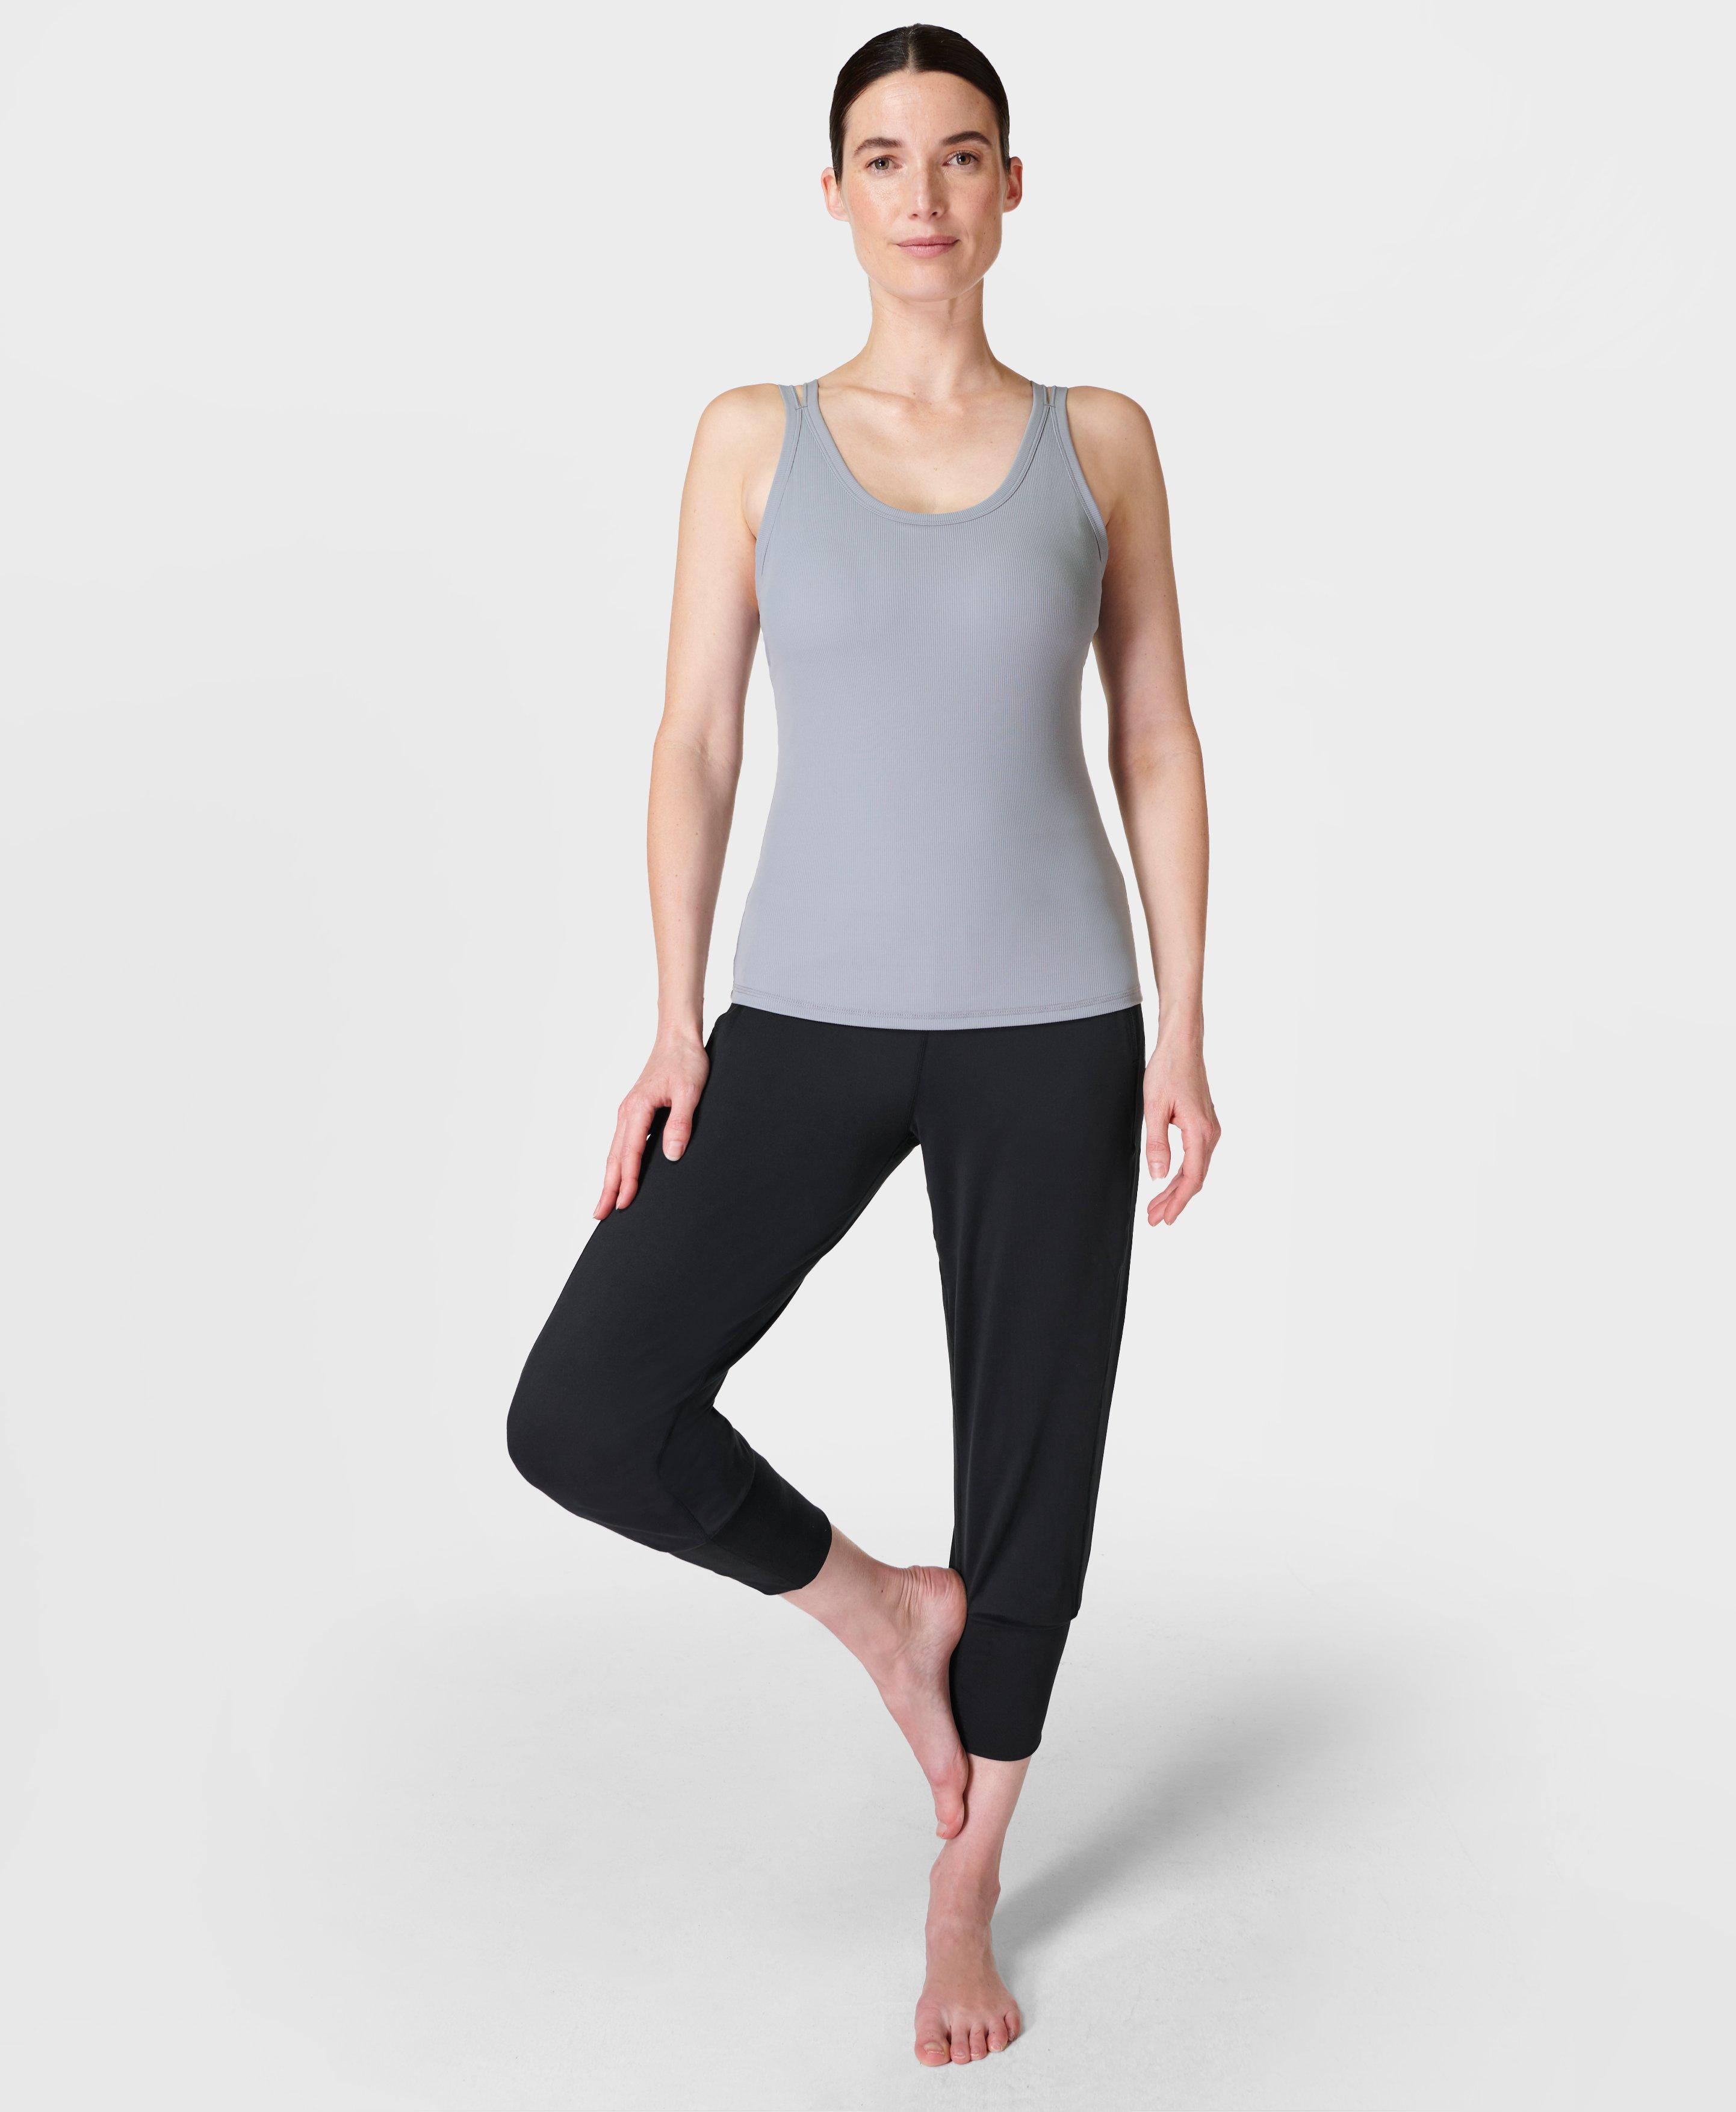 relaxed fit yoga pants